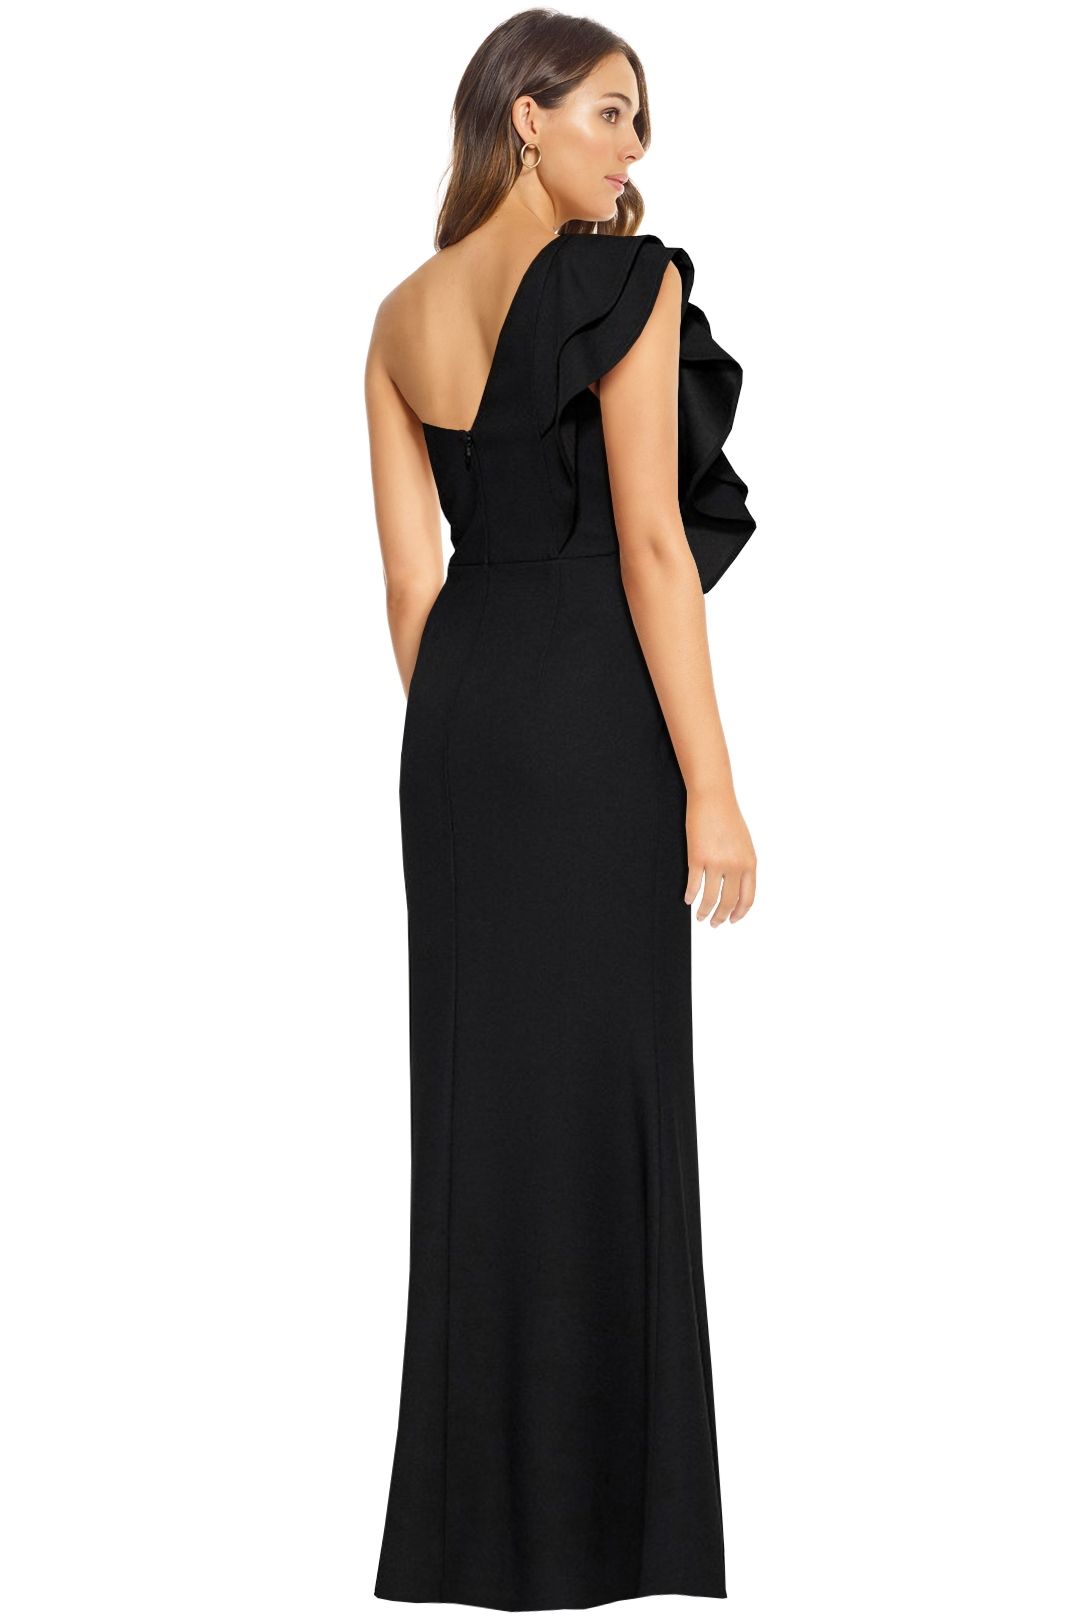 Free Fall Maxi Gown in Black by Sheike for Rent | GlamCorner